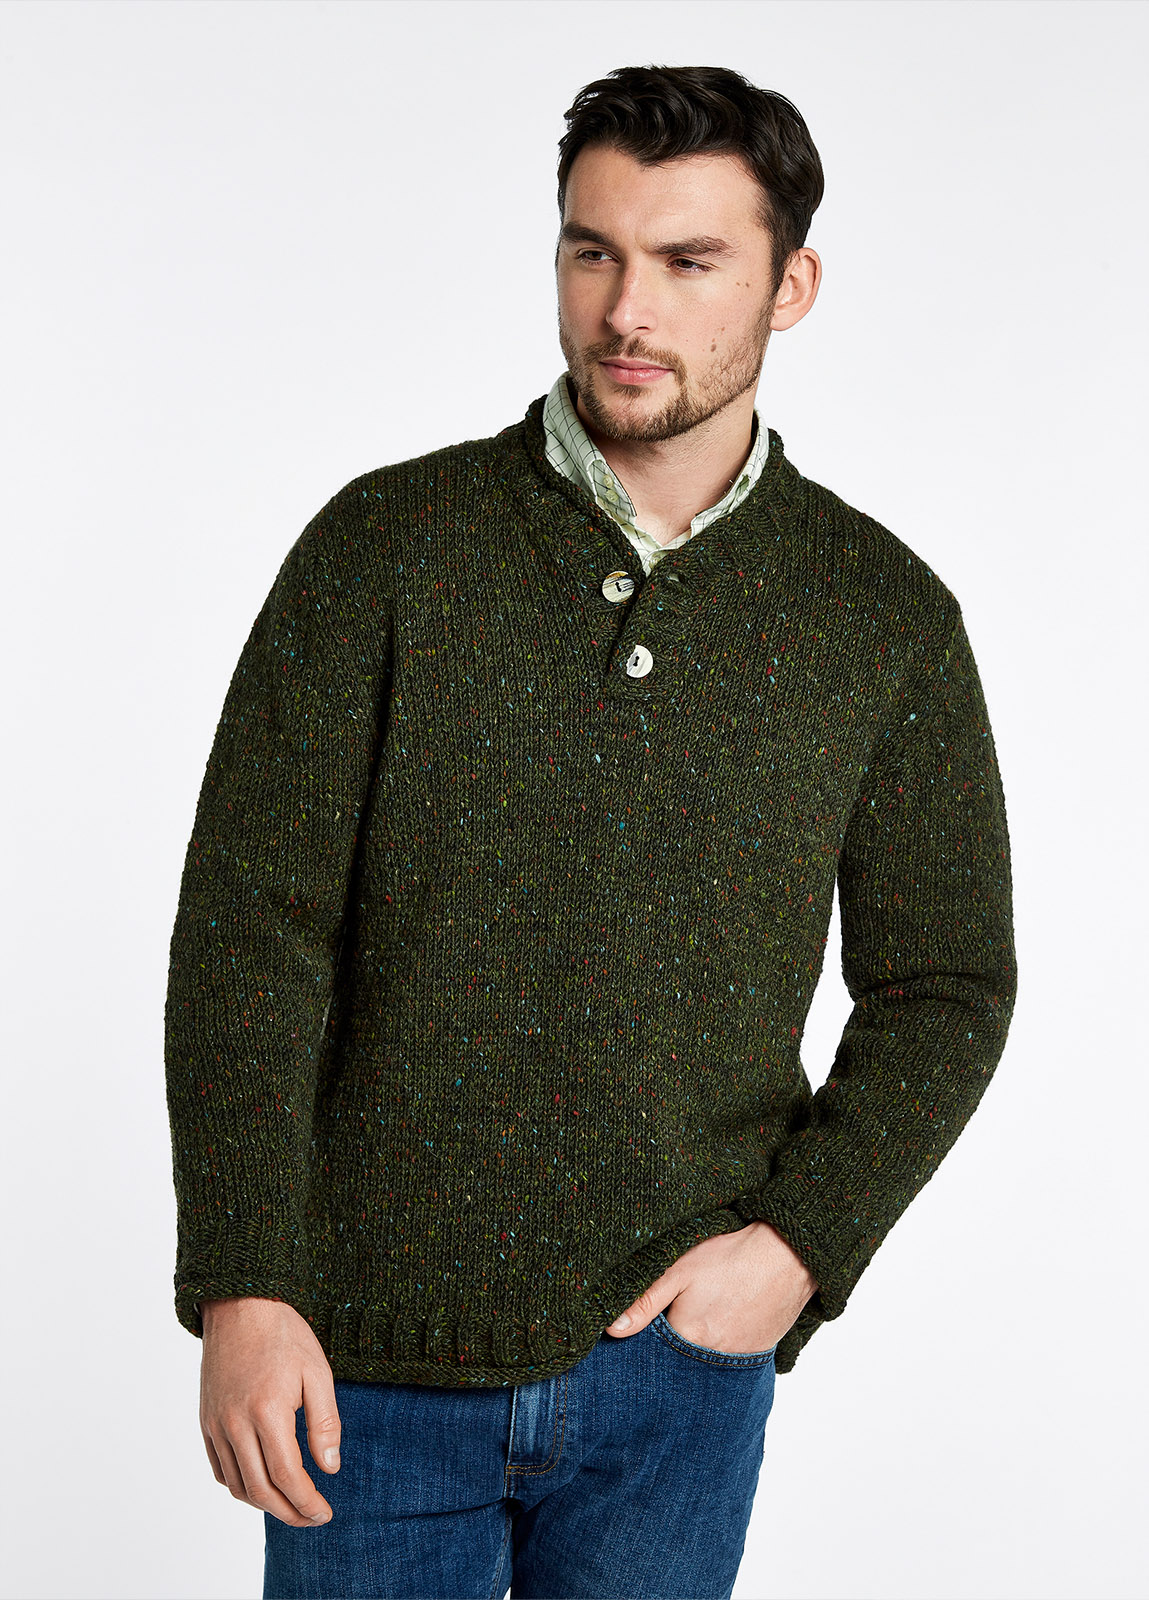 Taylor Sweater - Olive